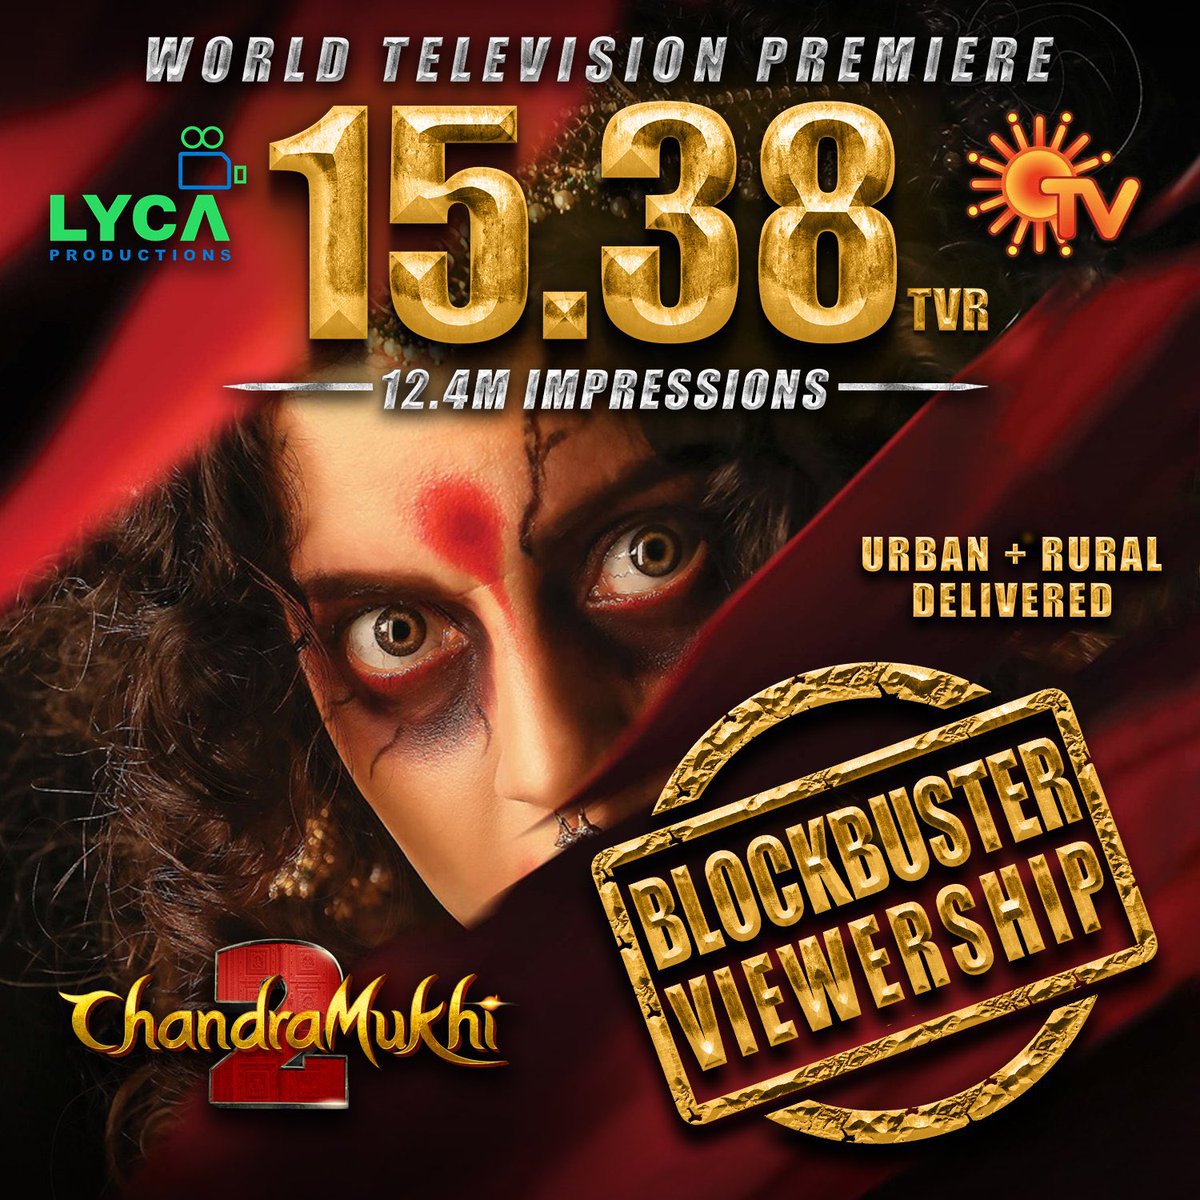 Congratulations to team #Chandramukhi2 for a blockbuster world television premiere! 👏🏼

The #KanganaRanaut starrer has one of the highest premieres in recent times with 15.38 TRP In U+R markets. Only #Varisu (19.60) and #Jailer (15.59) had higher ratings in 2023.